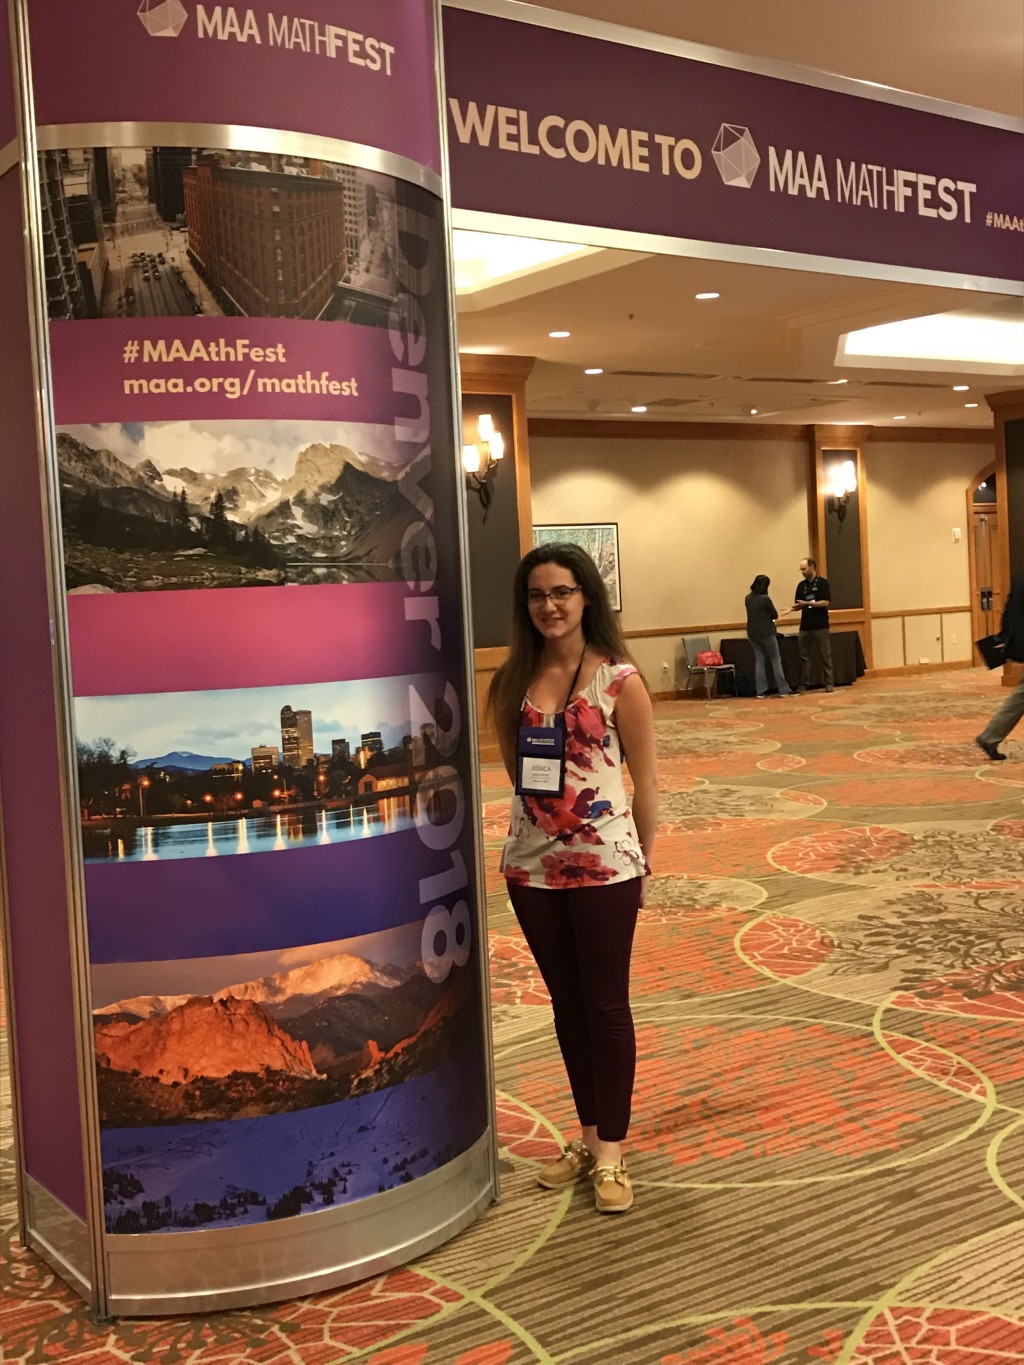 Jessica White learned more about blending her two majors while at MathFest in Denver, Colorado